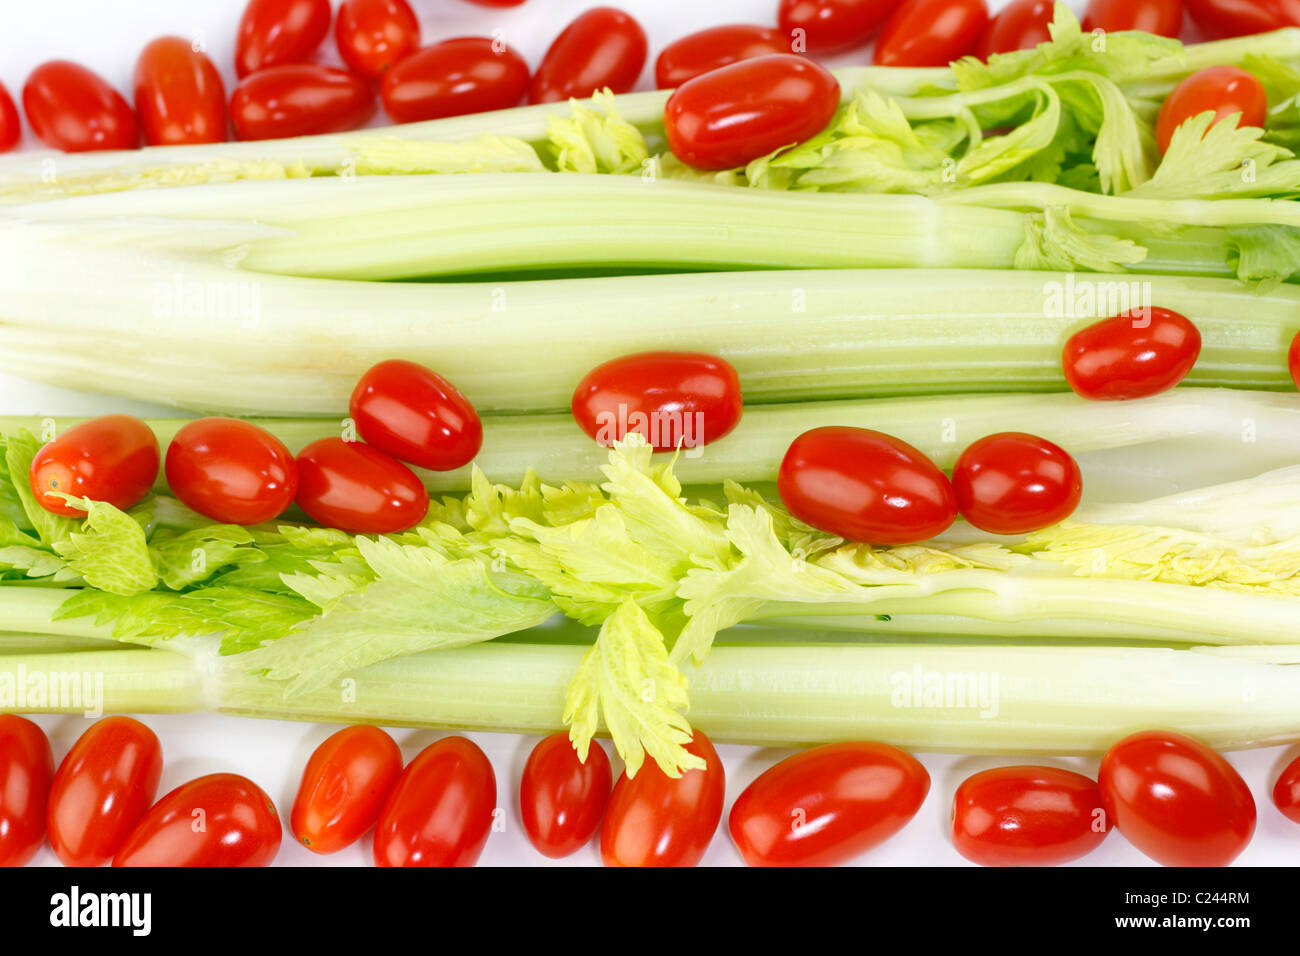 Organic celery heart stalks with small cherry plum tomatoes on a white background. Fresh long green vegetable and small round red fruit mix on white. Stock Photo